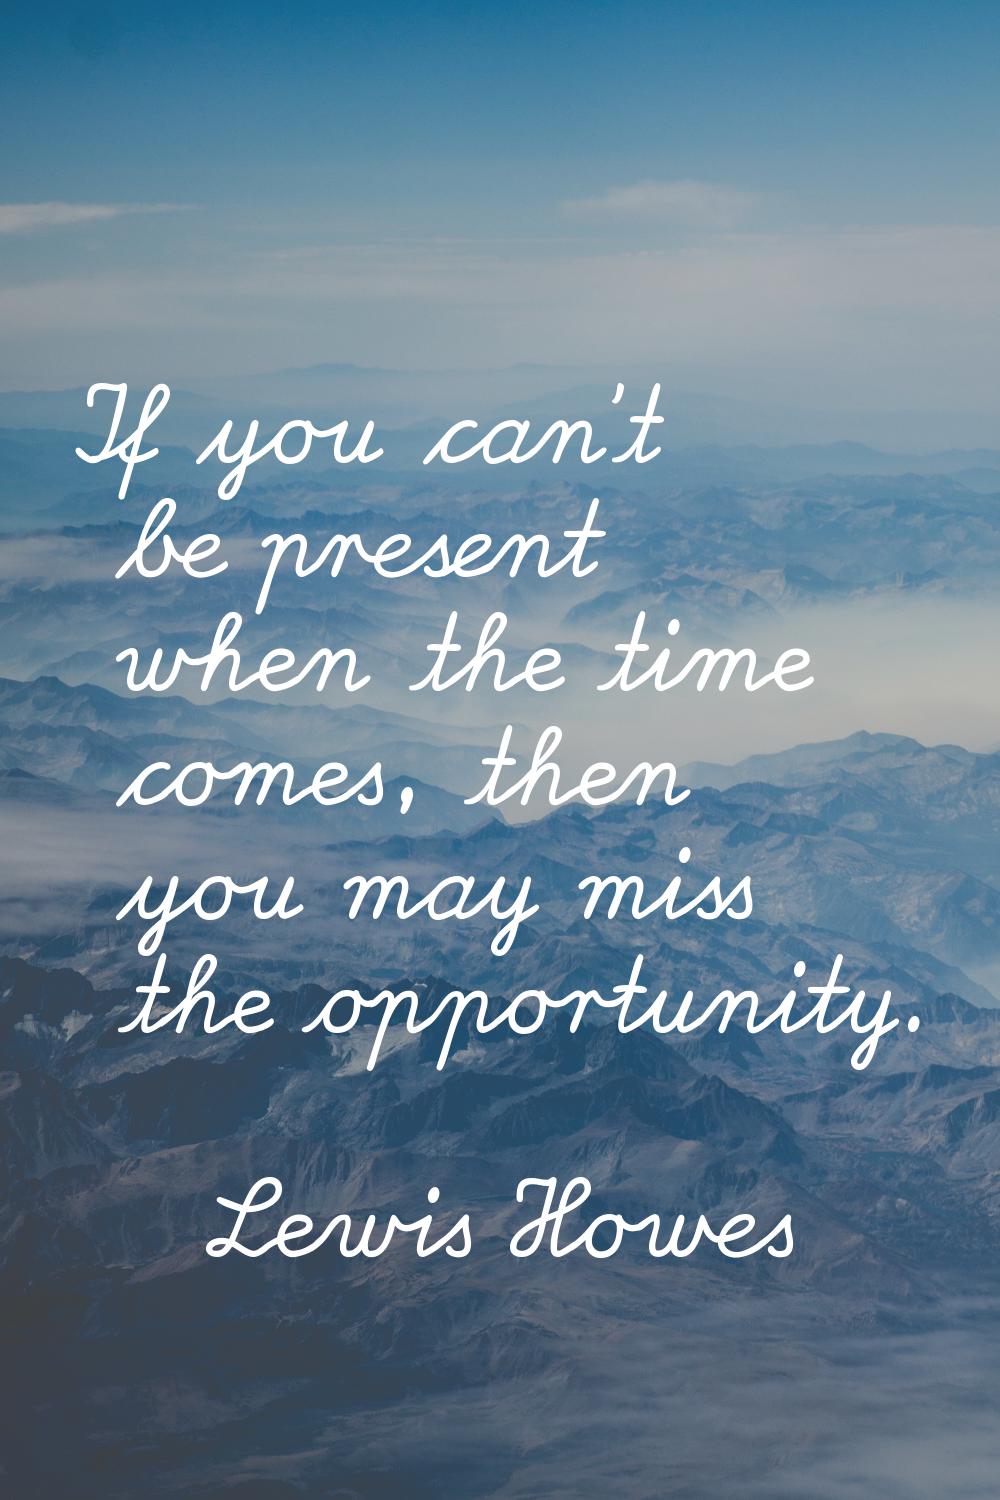 If you can't be present when the time comes, then you may miss the opportunity.